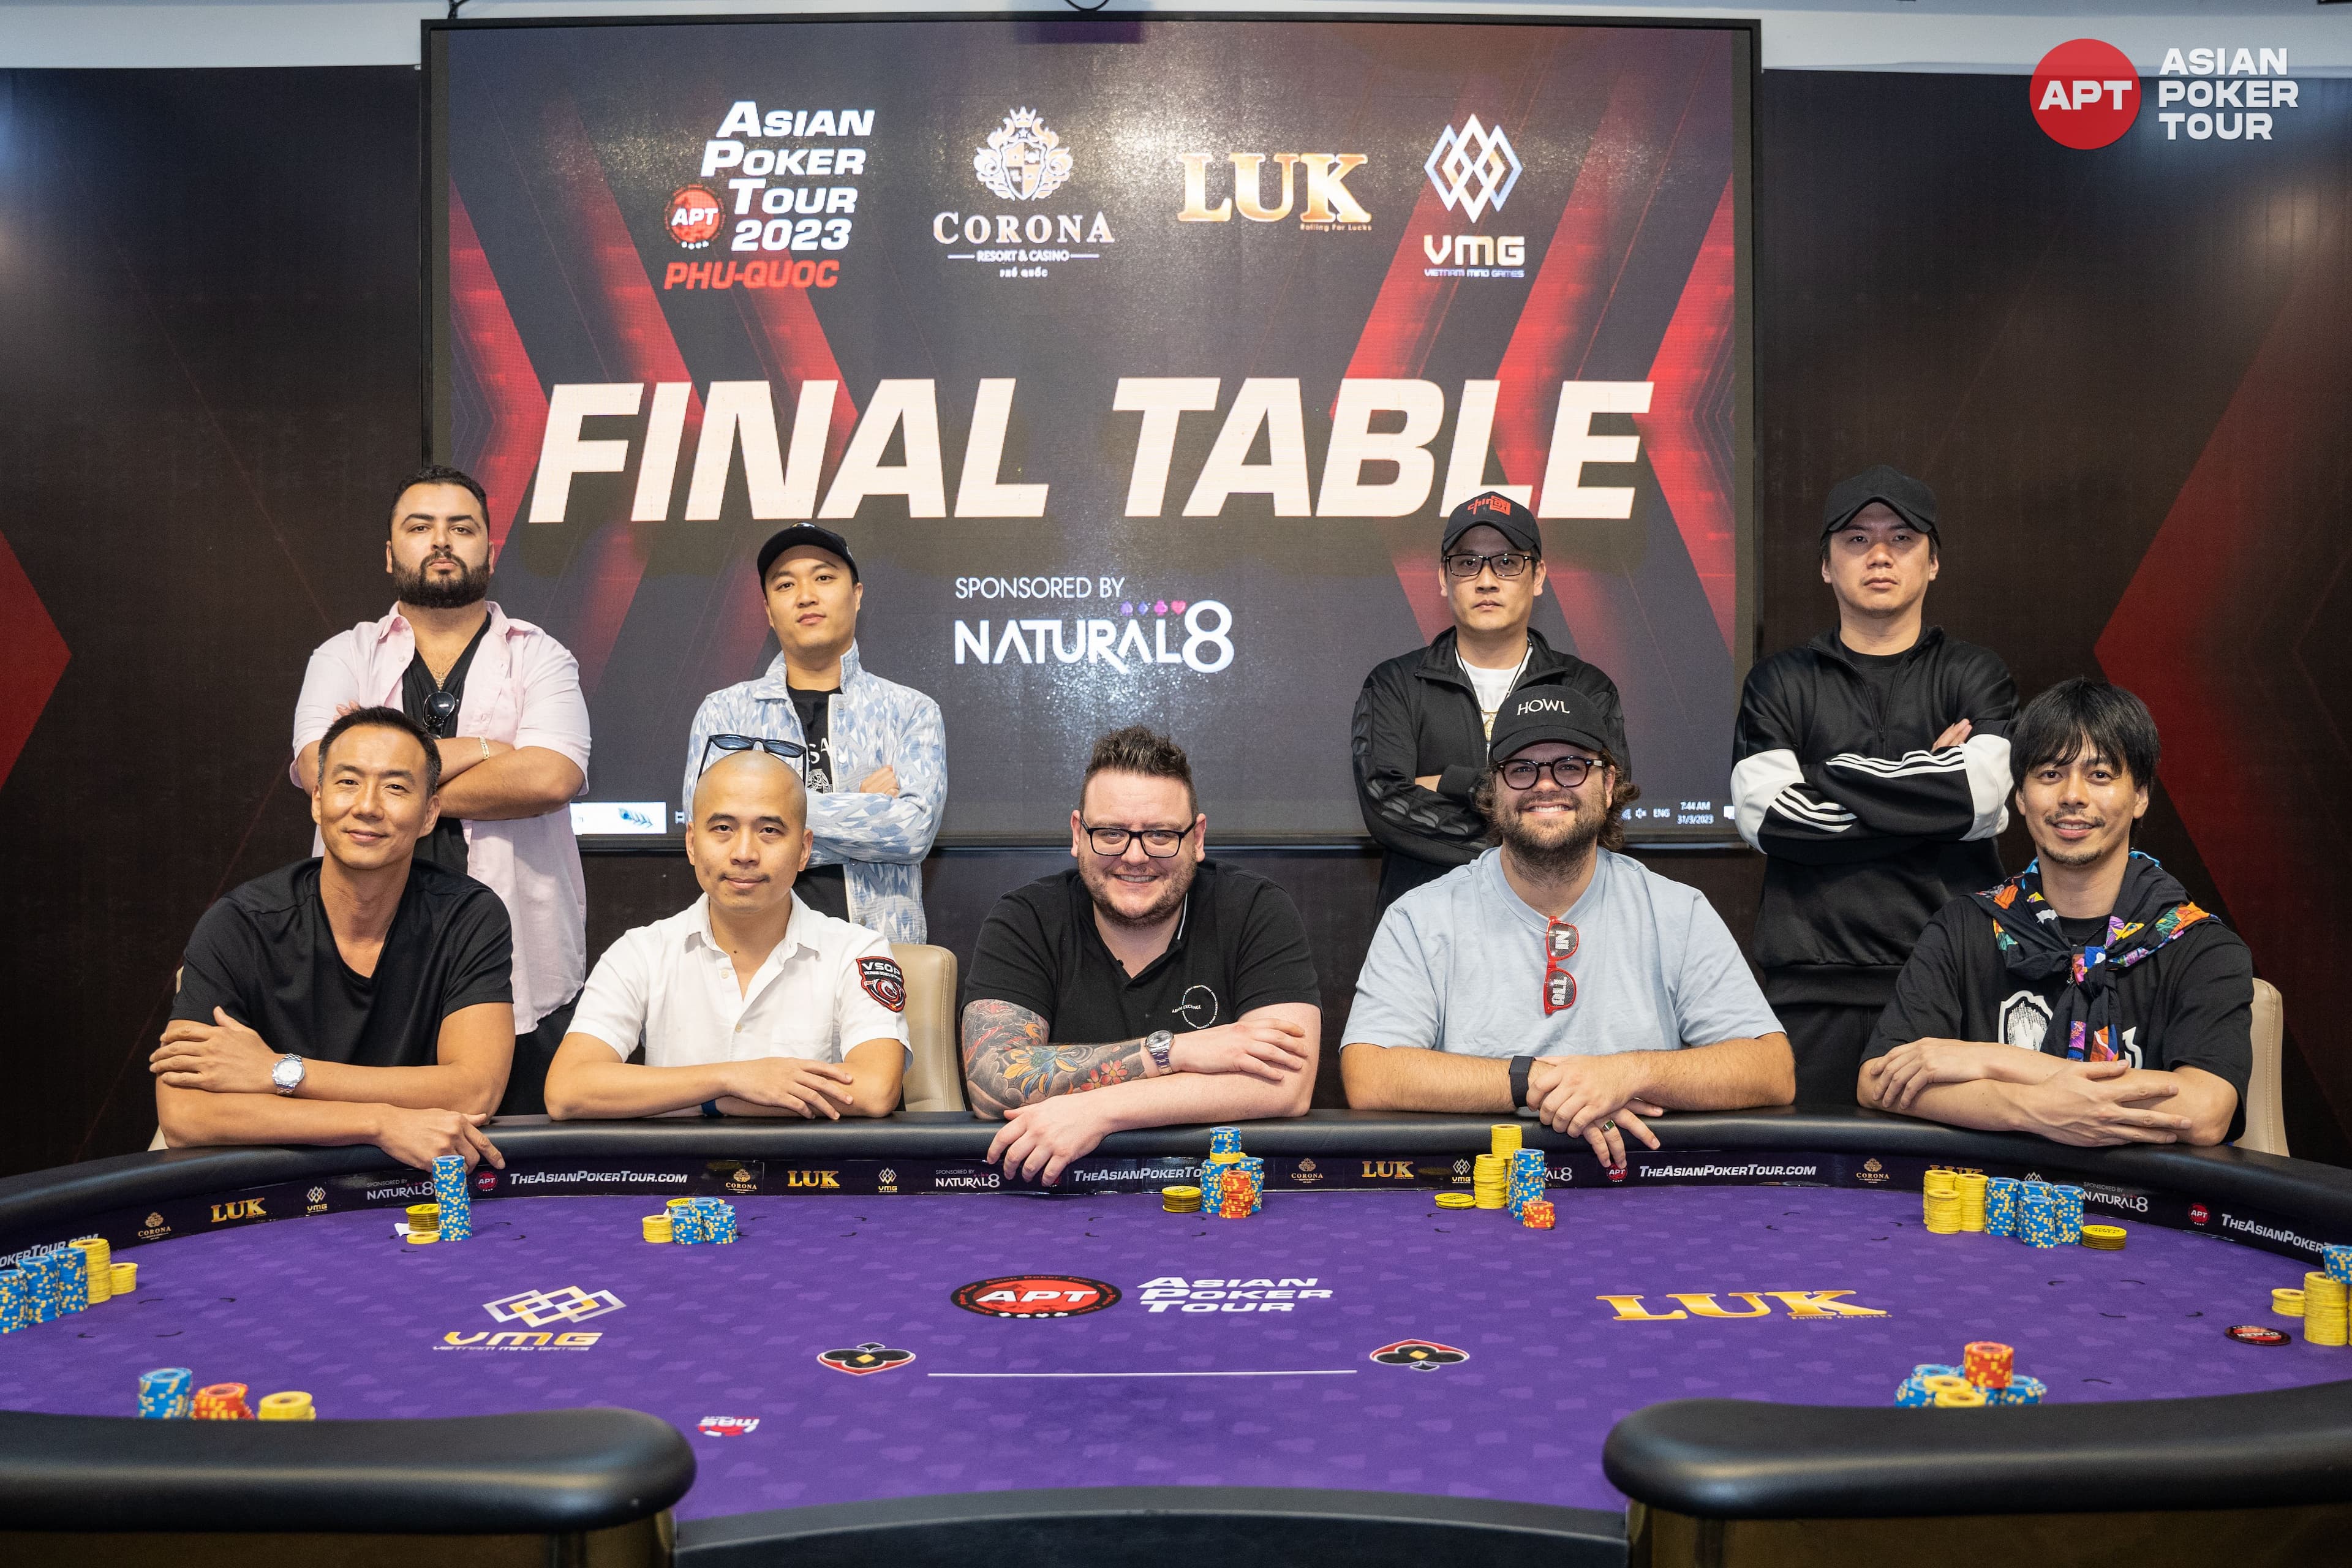 The 507-strong APT Phu Quoc Main Event Field Reduced to Final Nine Players; USA's Albert Gorelik Holds Commanding Lead